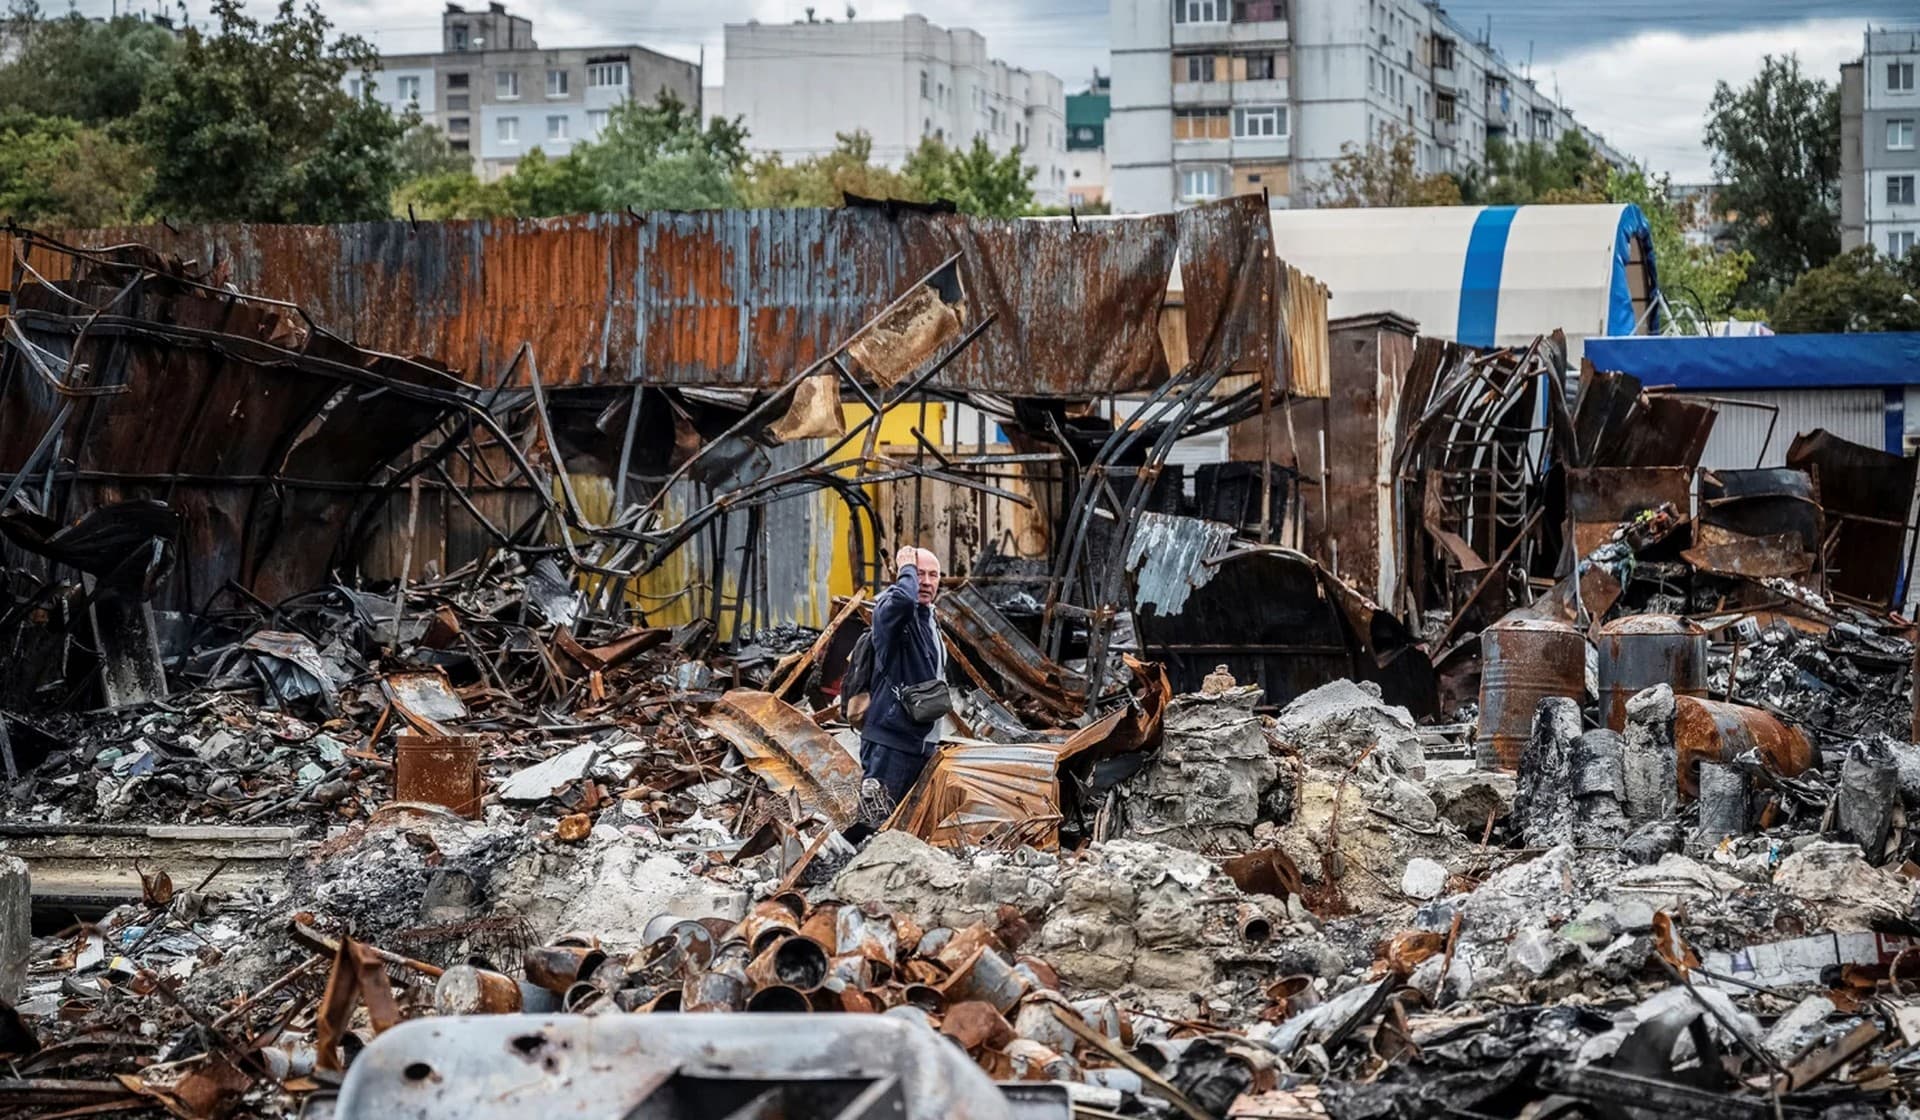 A local resident walks by a street market destroyed by military strikes in Saltivka